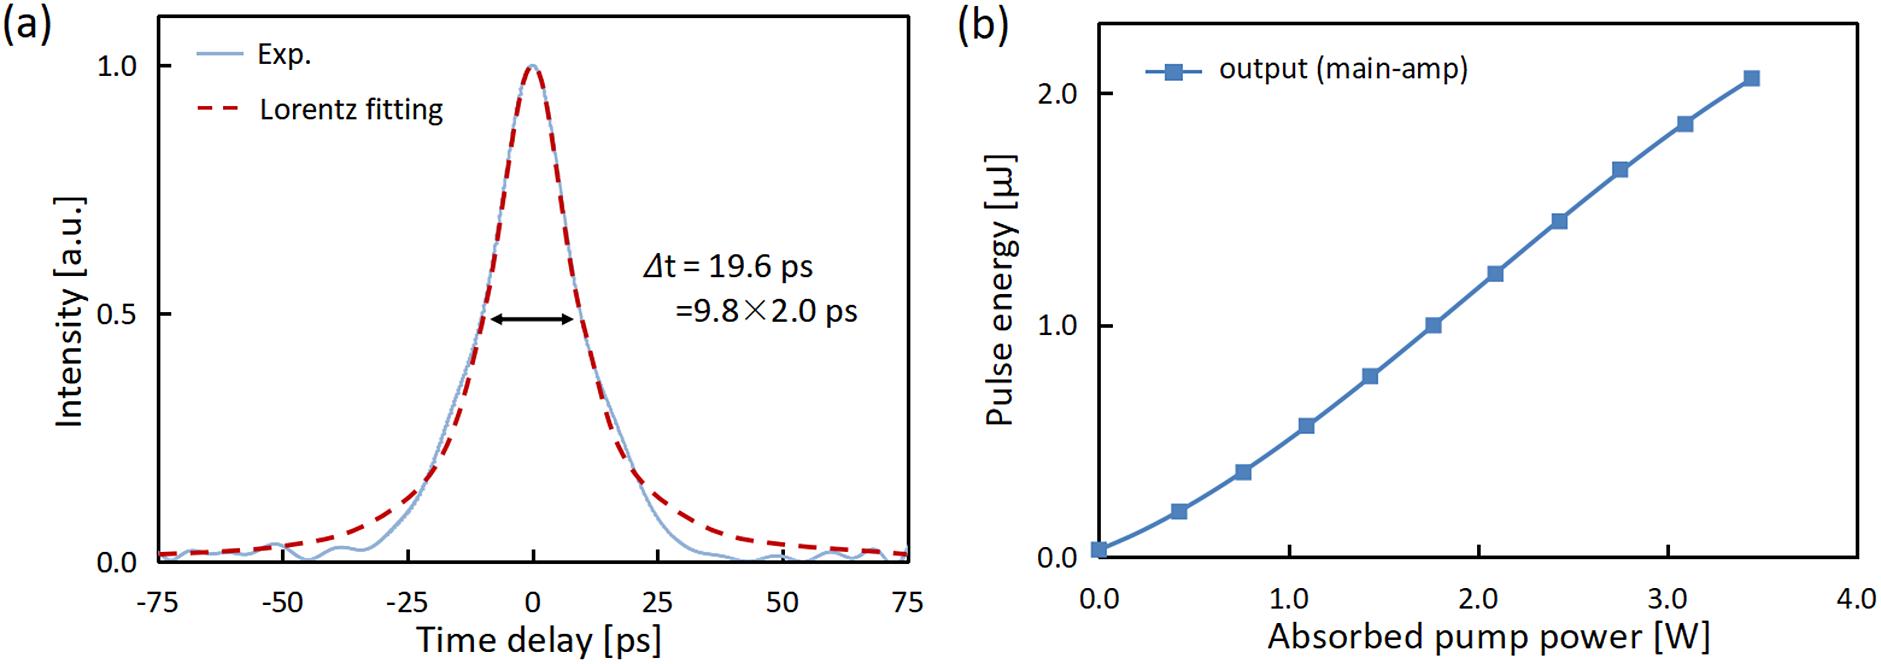 (a) Autocorrelation trace for the pulses after the pre-amplifier. (b) Dependence of output pulse energy on the absorbed pump power in the main amplifier.